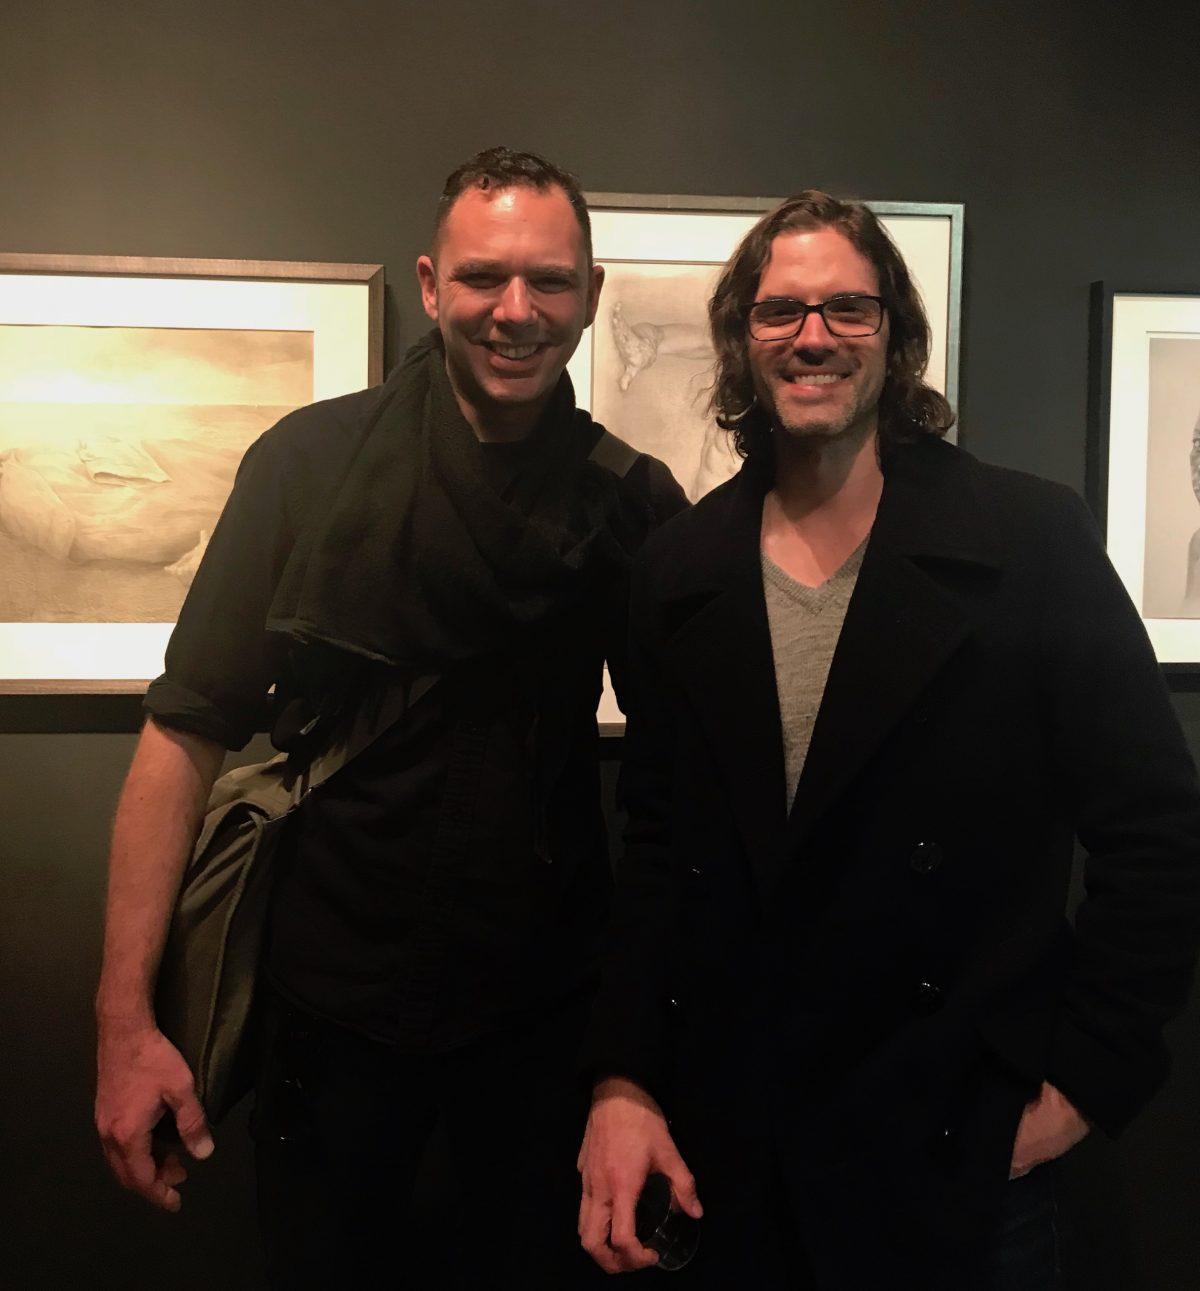 M. Tobias Hall (R) and his former teacher Michael Grimaldi at the opening of “On Paper, An Exhibition of Drawings” at The Florence Academy of Art–U.S. in Jersey City, N.J., on April 29, 2018. (Milene Fernandez/The Epoch Times)